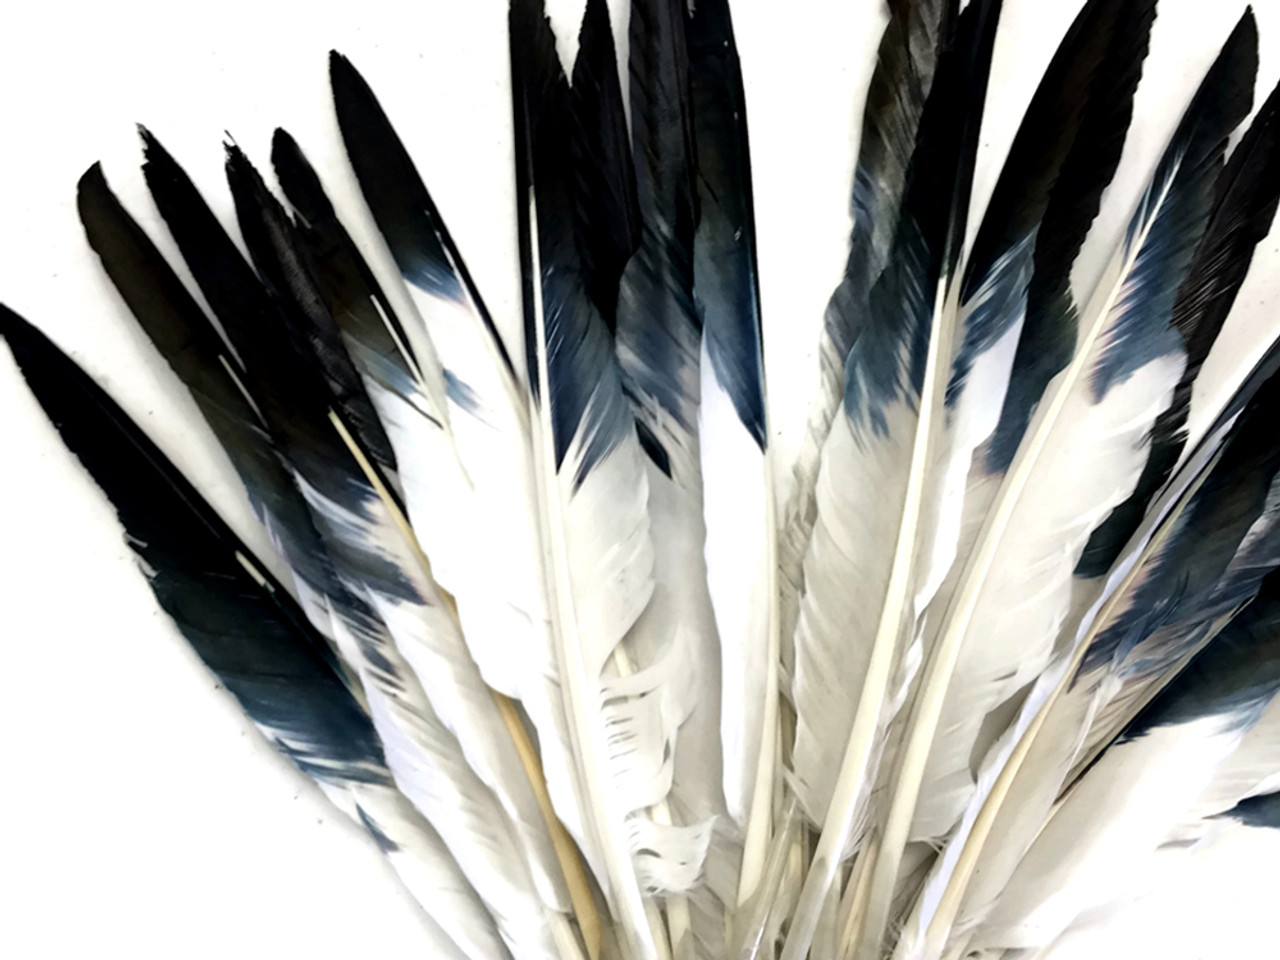 10 Pieces Natural White Goose Feathers